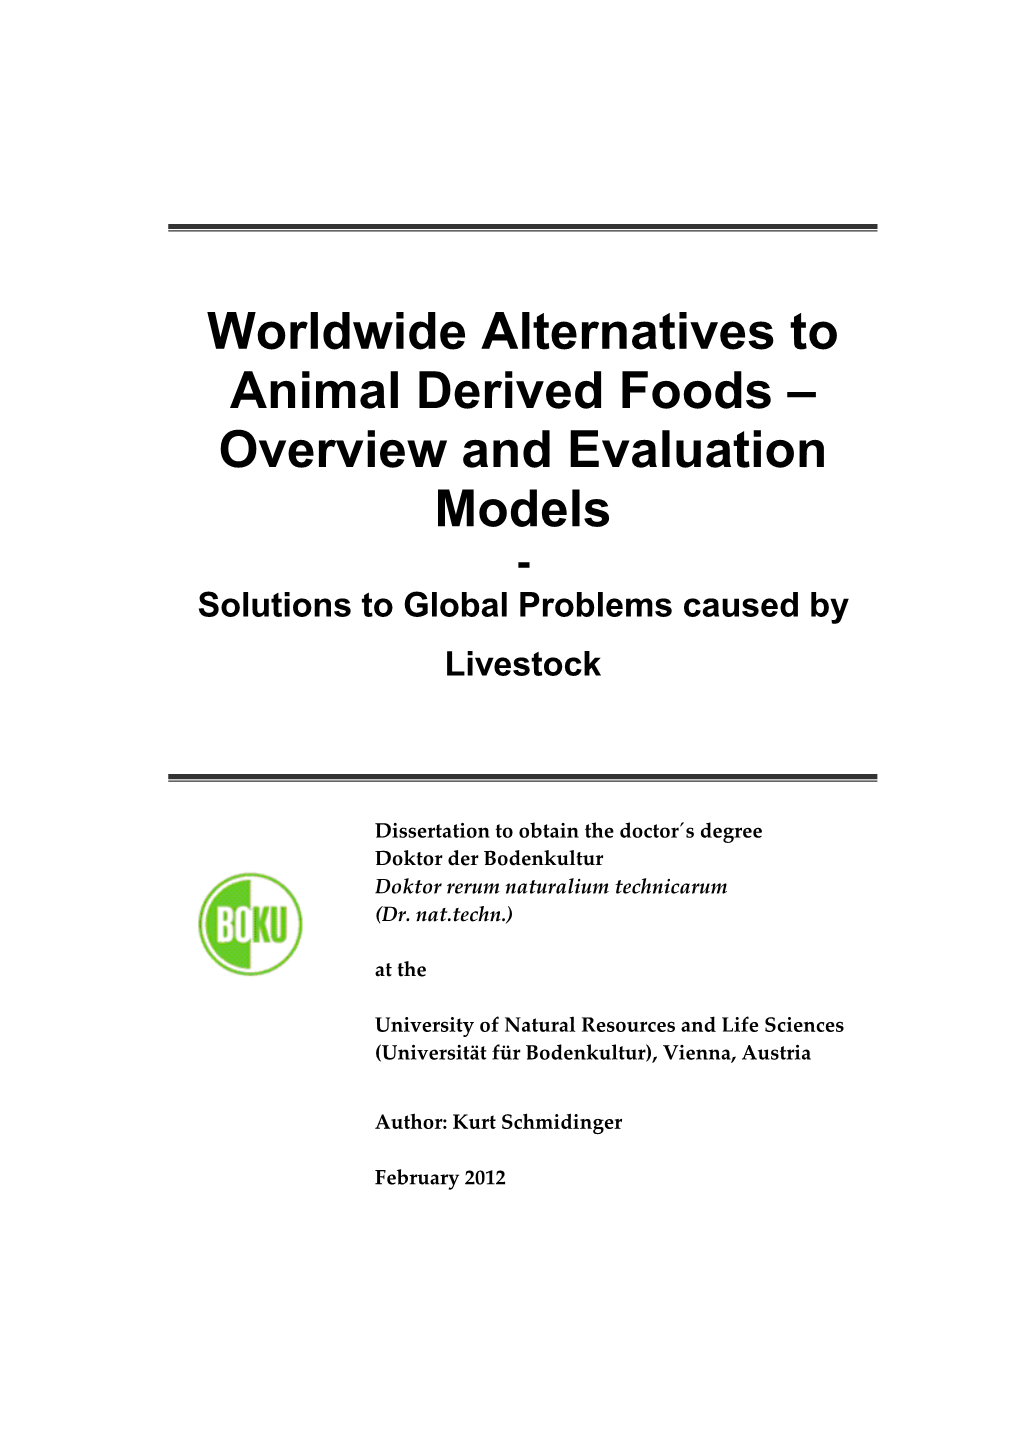 Worldwide Alternatives to Animal Derived Foods – Overview and Evaluation Models - Solutions to Global Problems Caused by Livestock